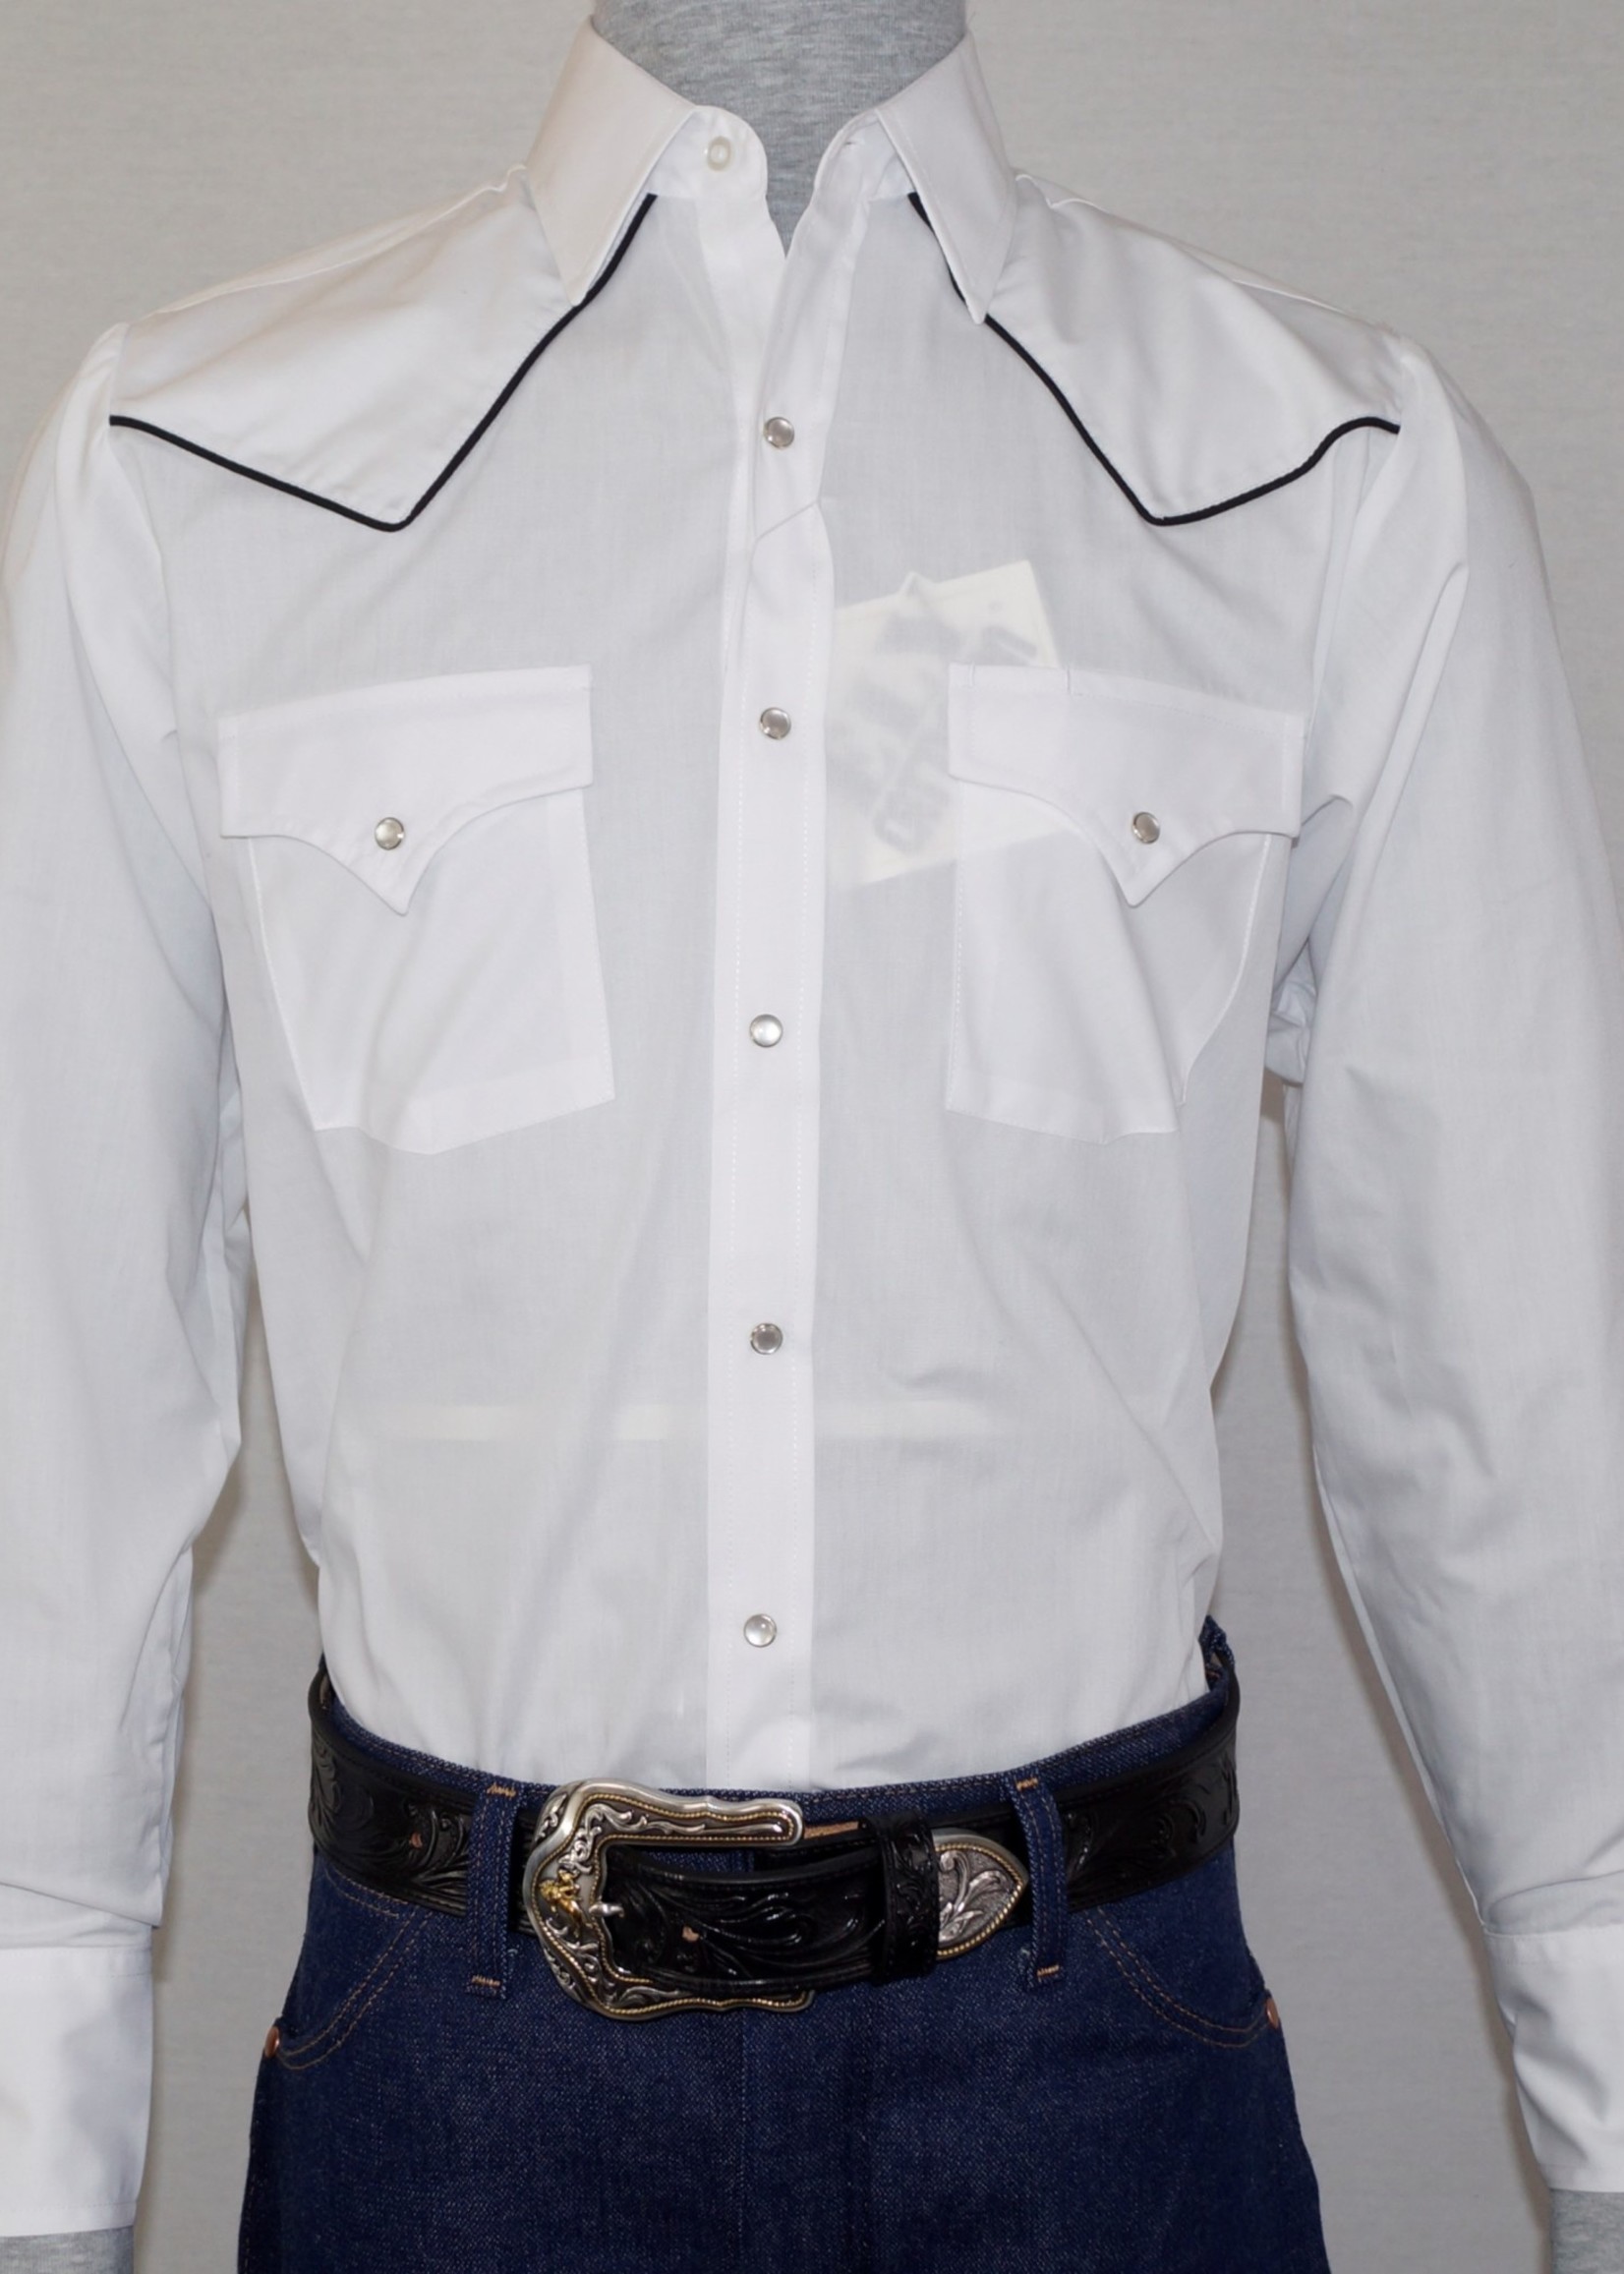 Ely Men's Long Sleeve Western Shirt with Black Piping